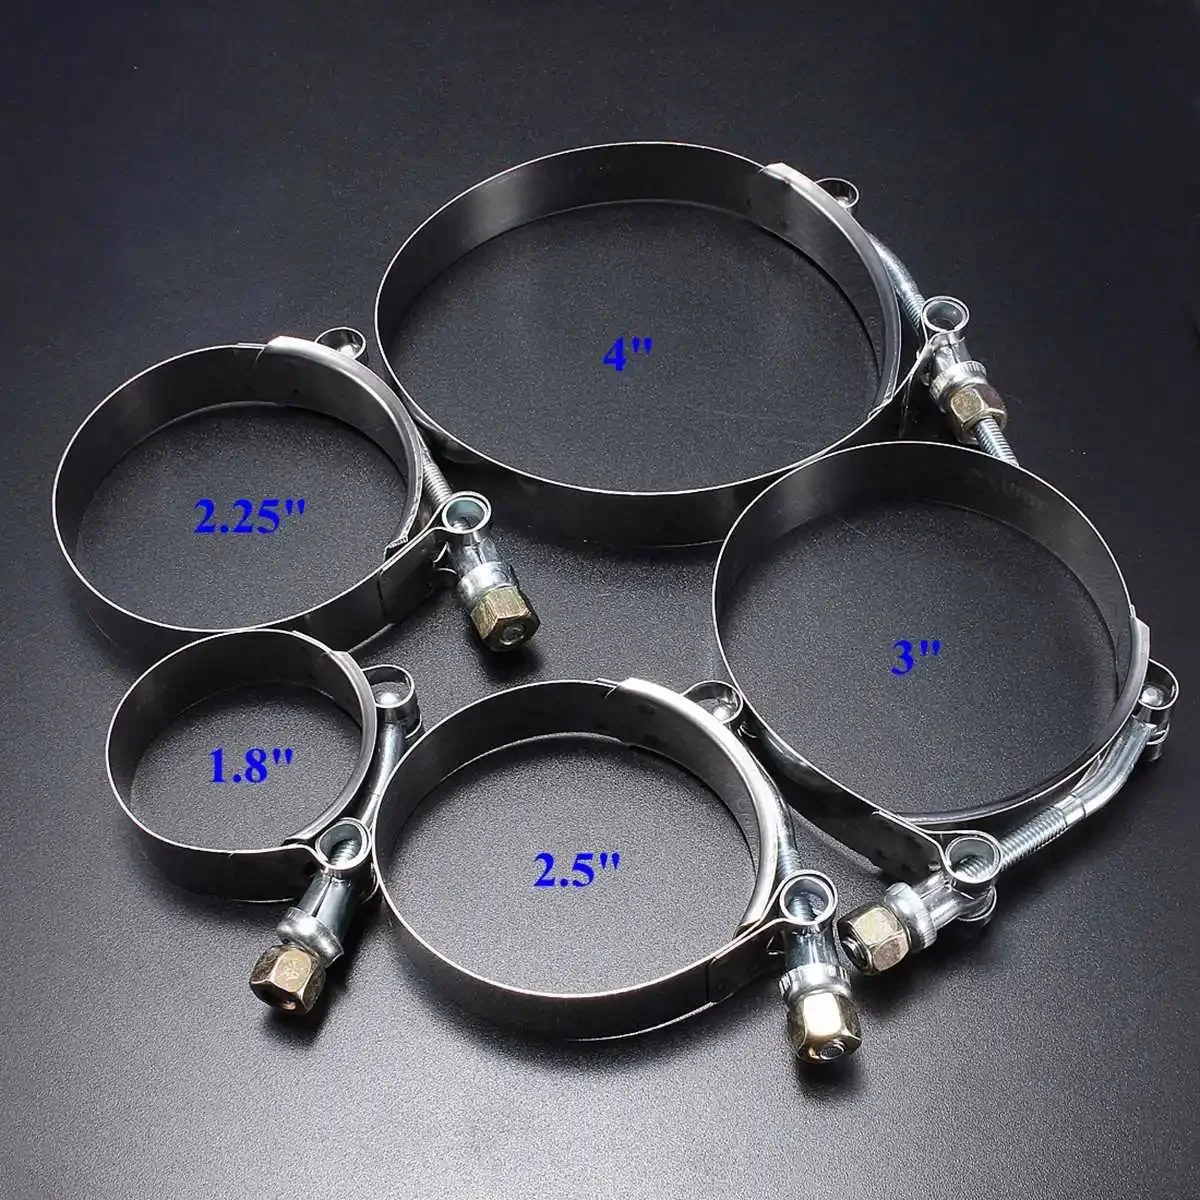 

1.8 ， 2.25 ， 2.5 ， 3 Inch 4 Inch Stainless Steel T-Bolt TBolt Clamp Turbo /Down-pipe Hose Coupler /Intake